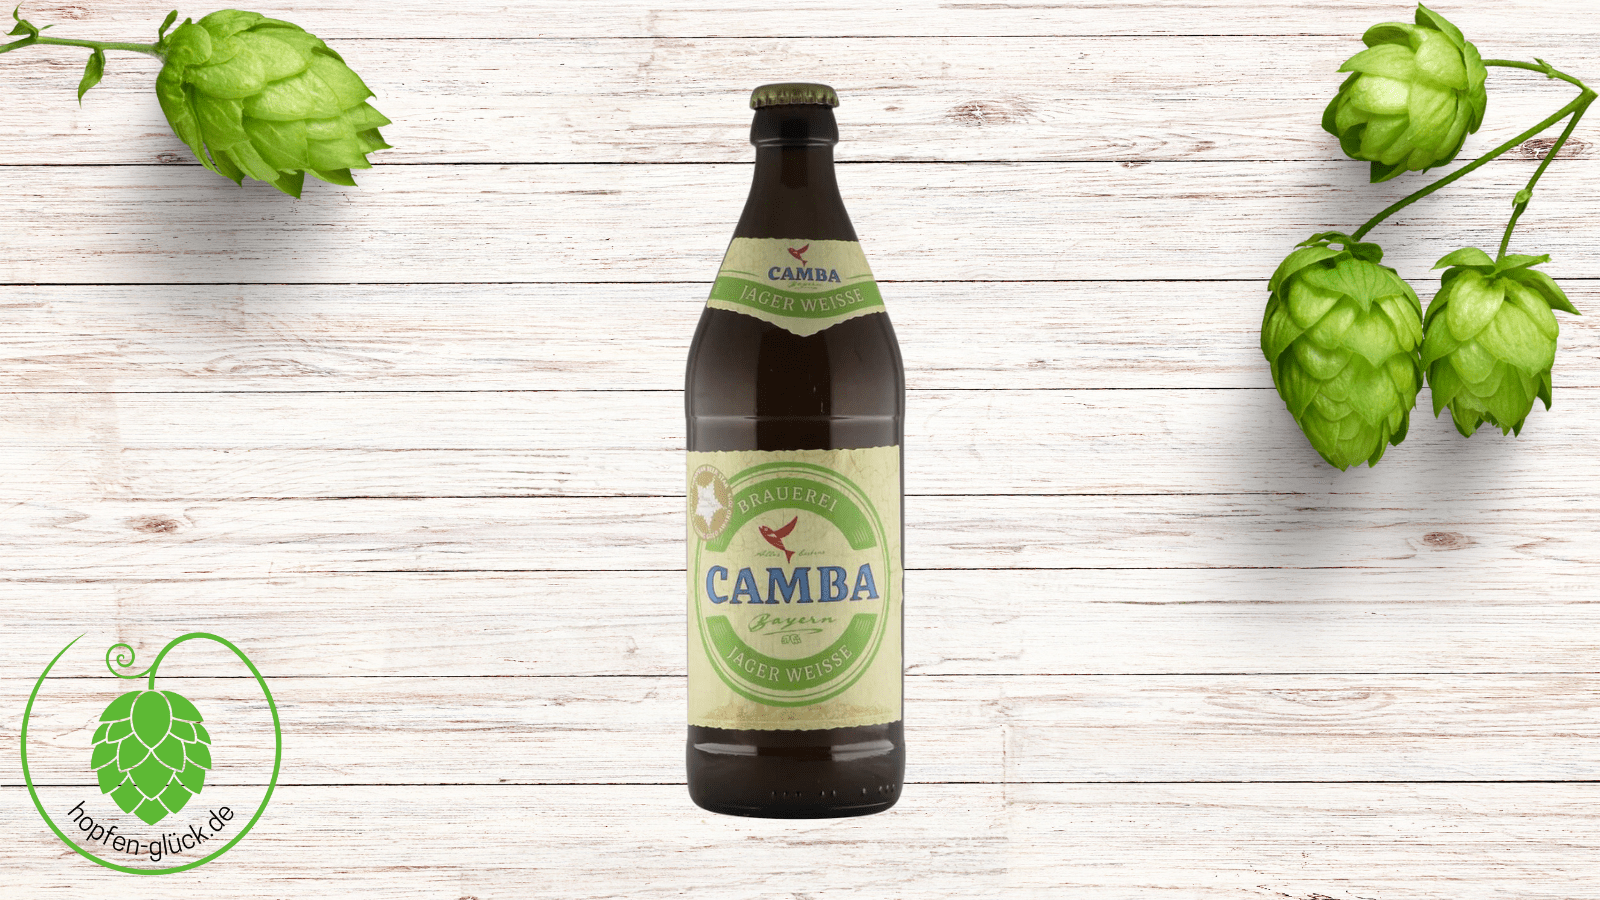 Camba Bavaria – Jager Weisse / Simcoe Weisse